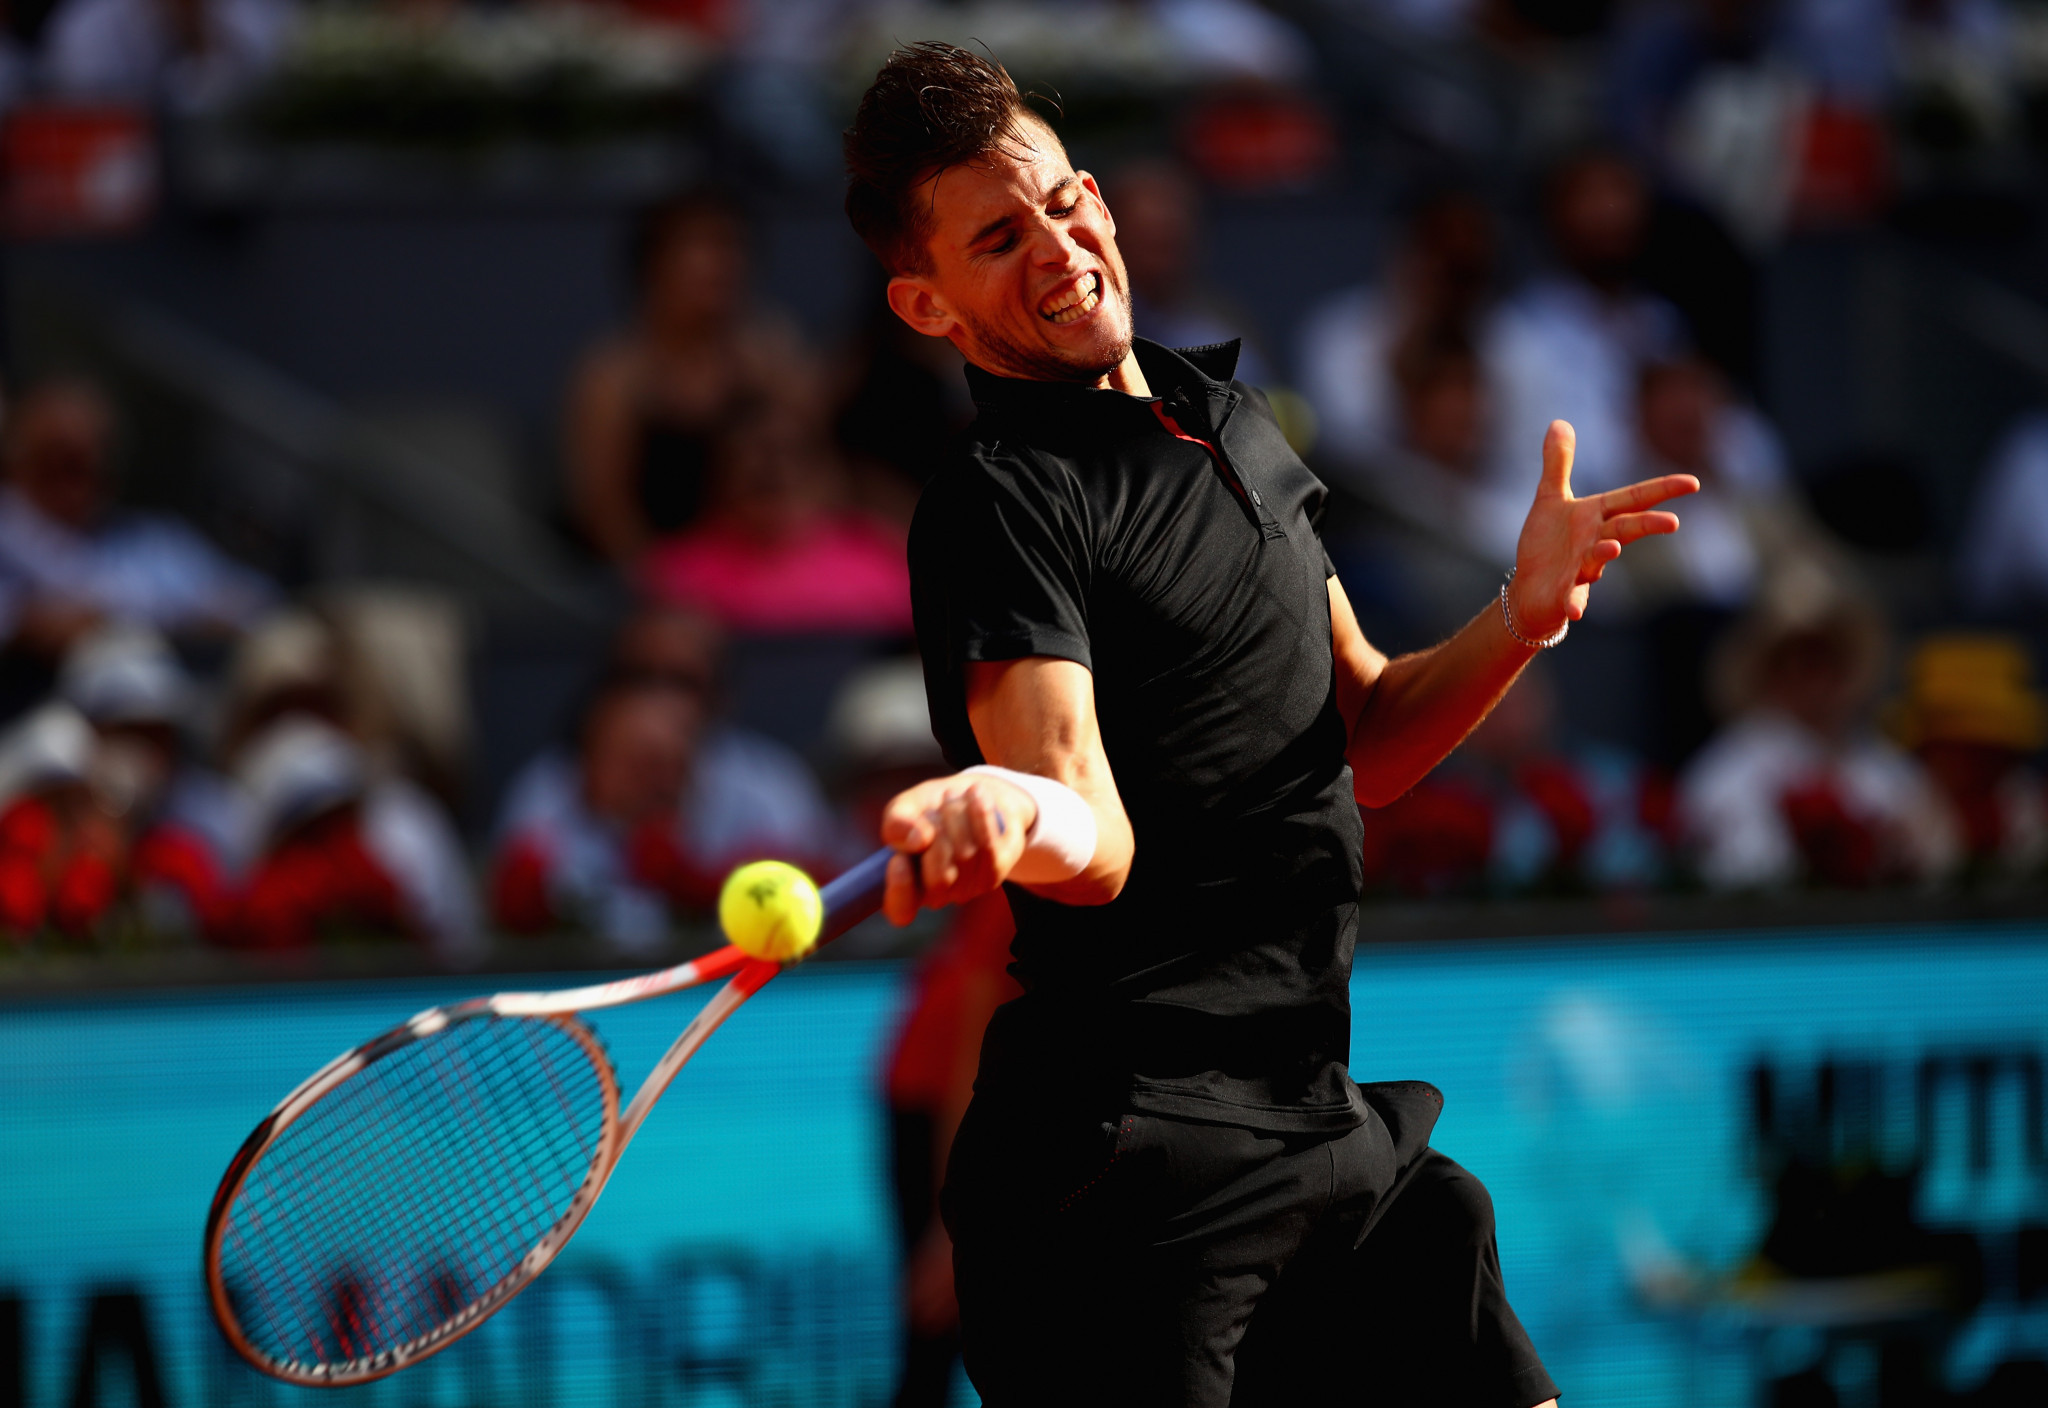 Dominic Thiem beat Rafael Nadal at the Mutua Madrid Open today ©Getty Images